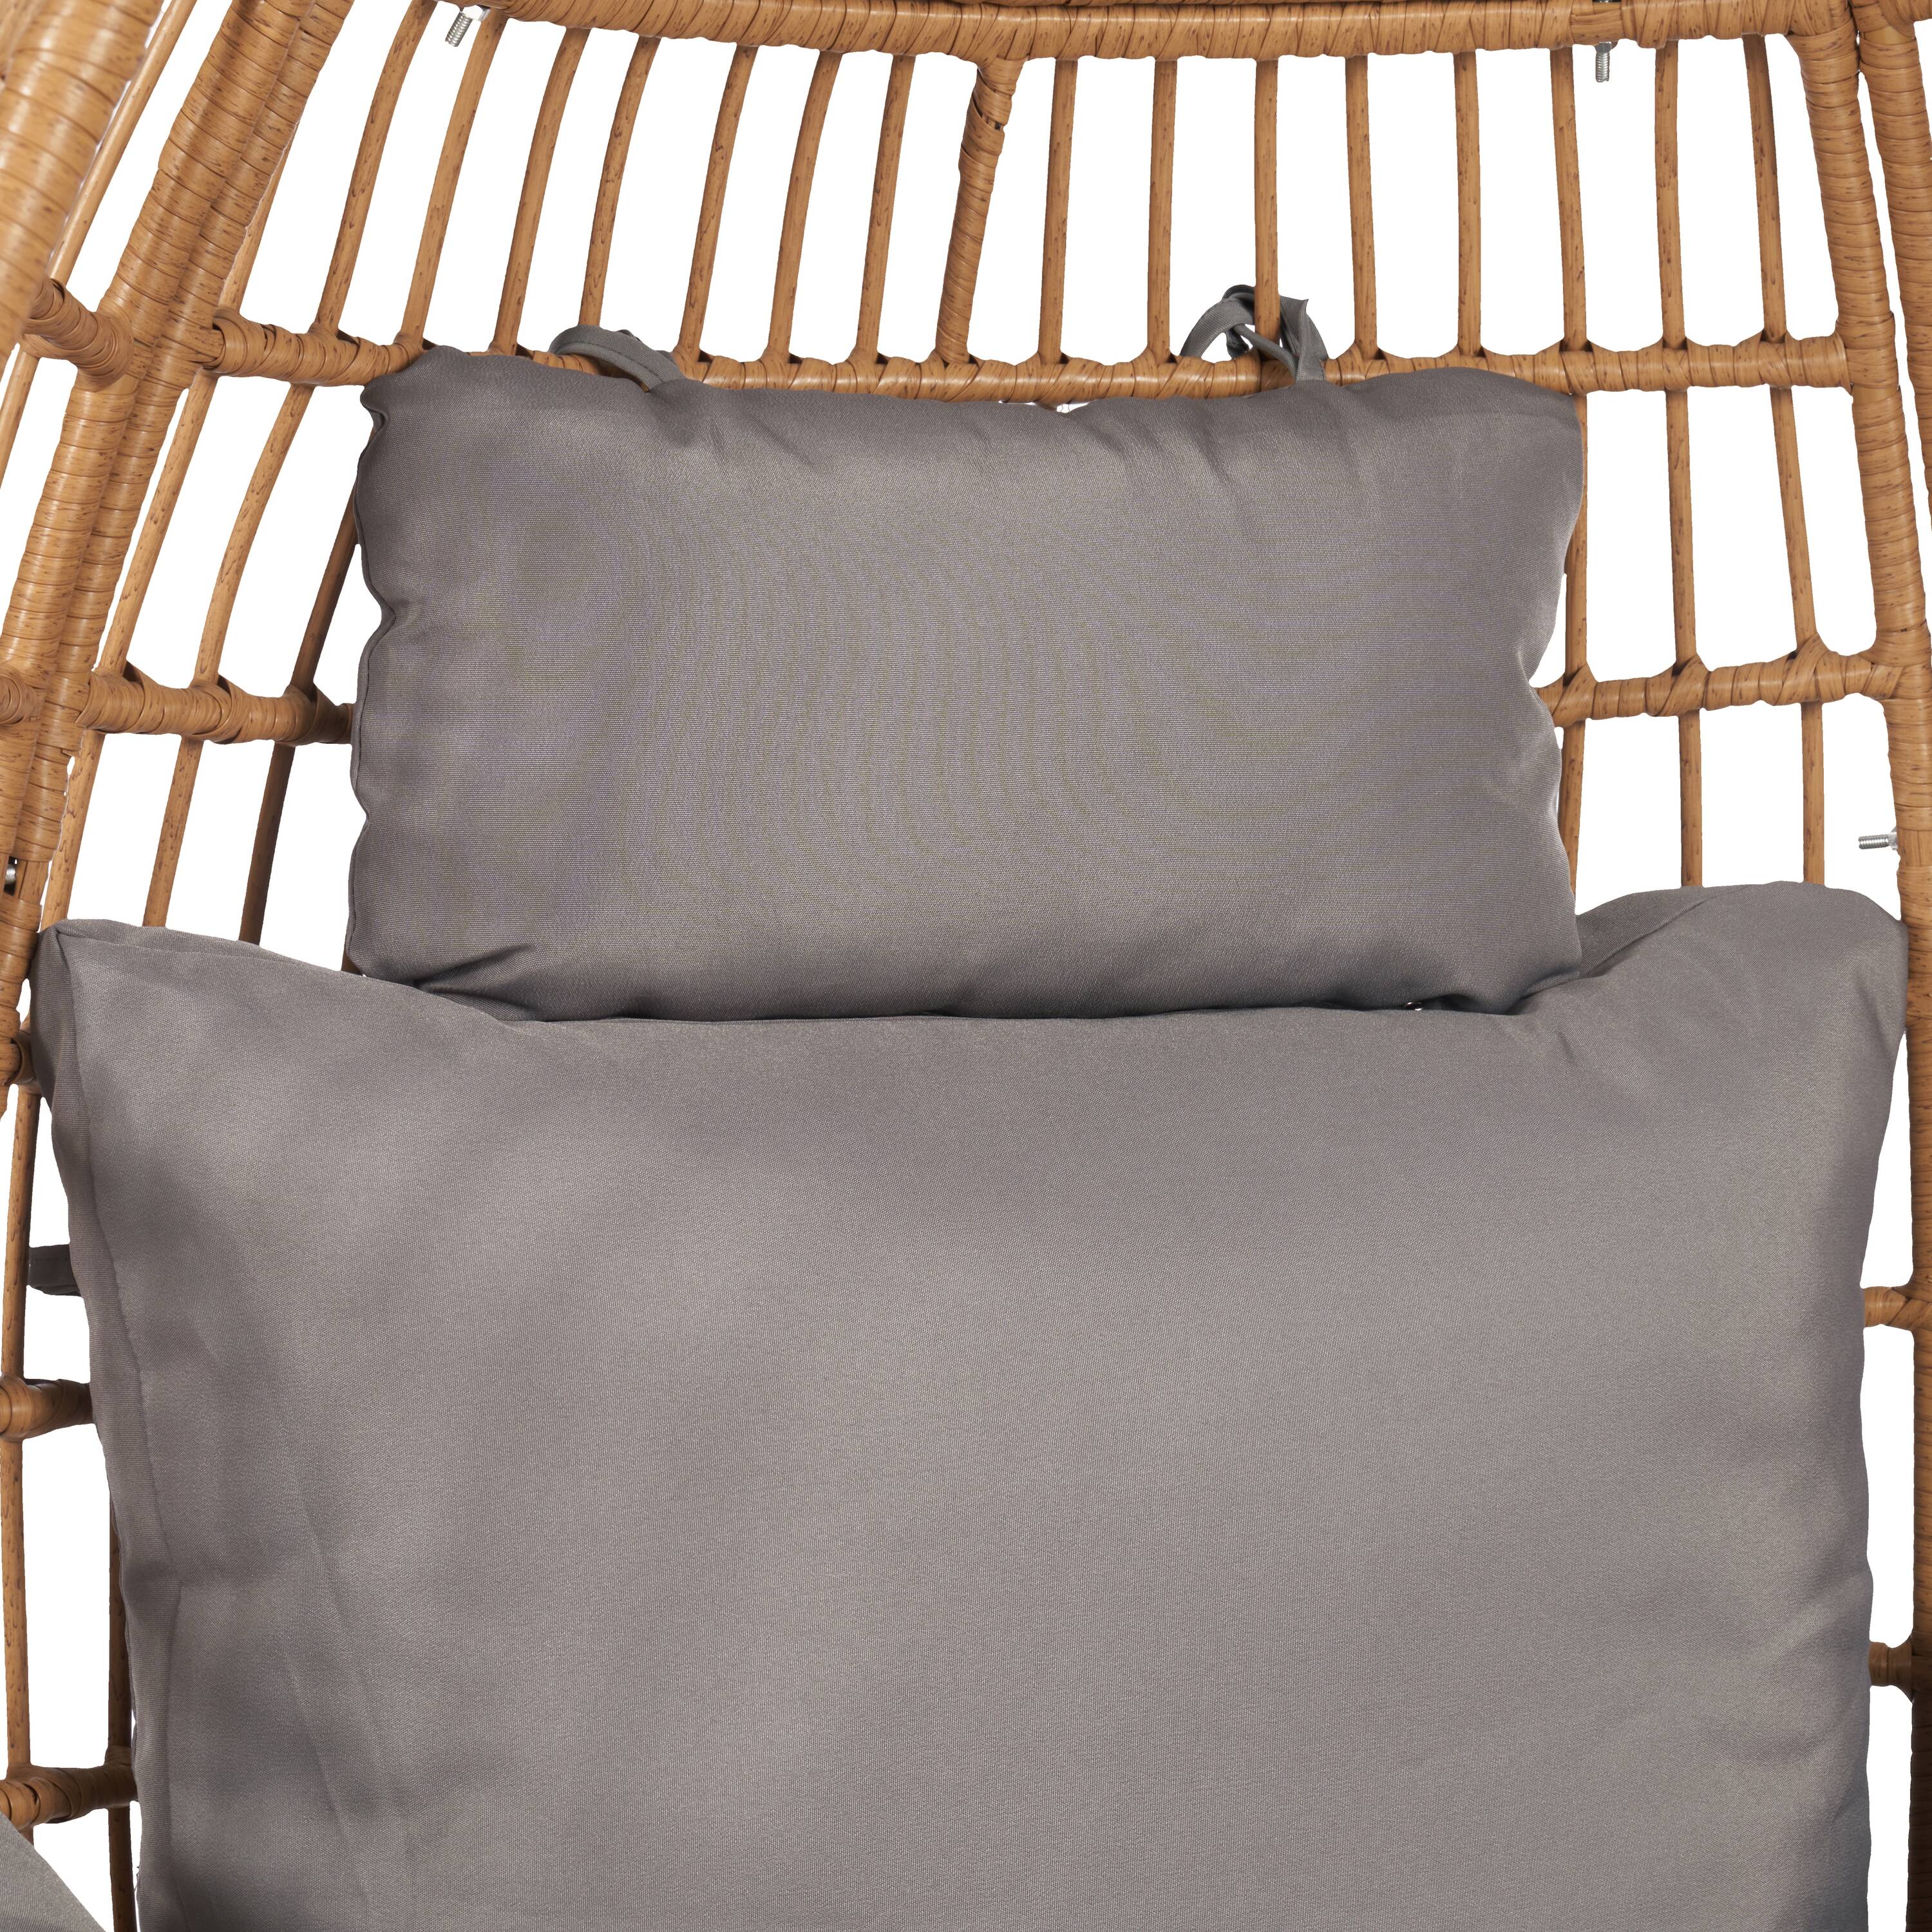 SANSTAR Patio Chairs Wicker Brown Wicker Frame Stationary Egg Chair(s ...